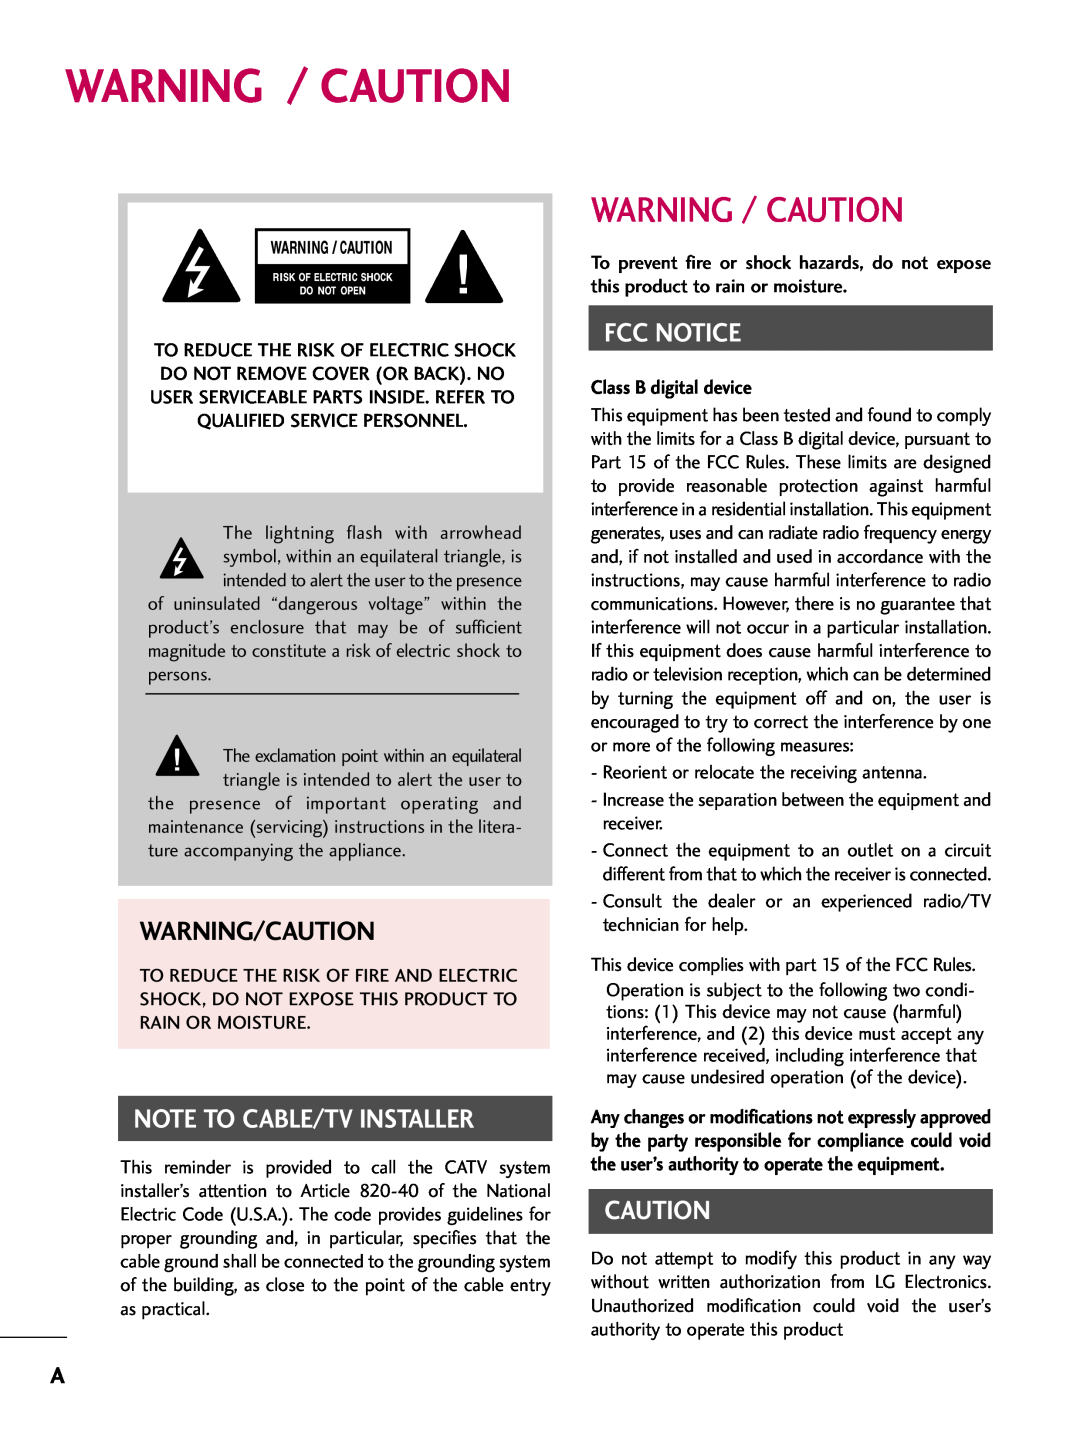 LG Electronics 42PQ12 Warning / Caution, Warning/Caution, Class B digital device, Note To Cable/Tv Installer, Fcc Notice 